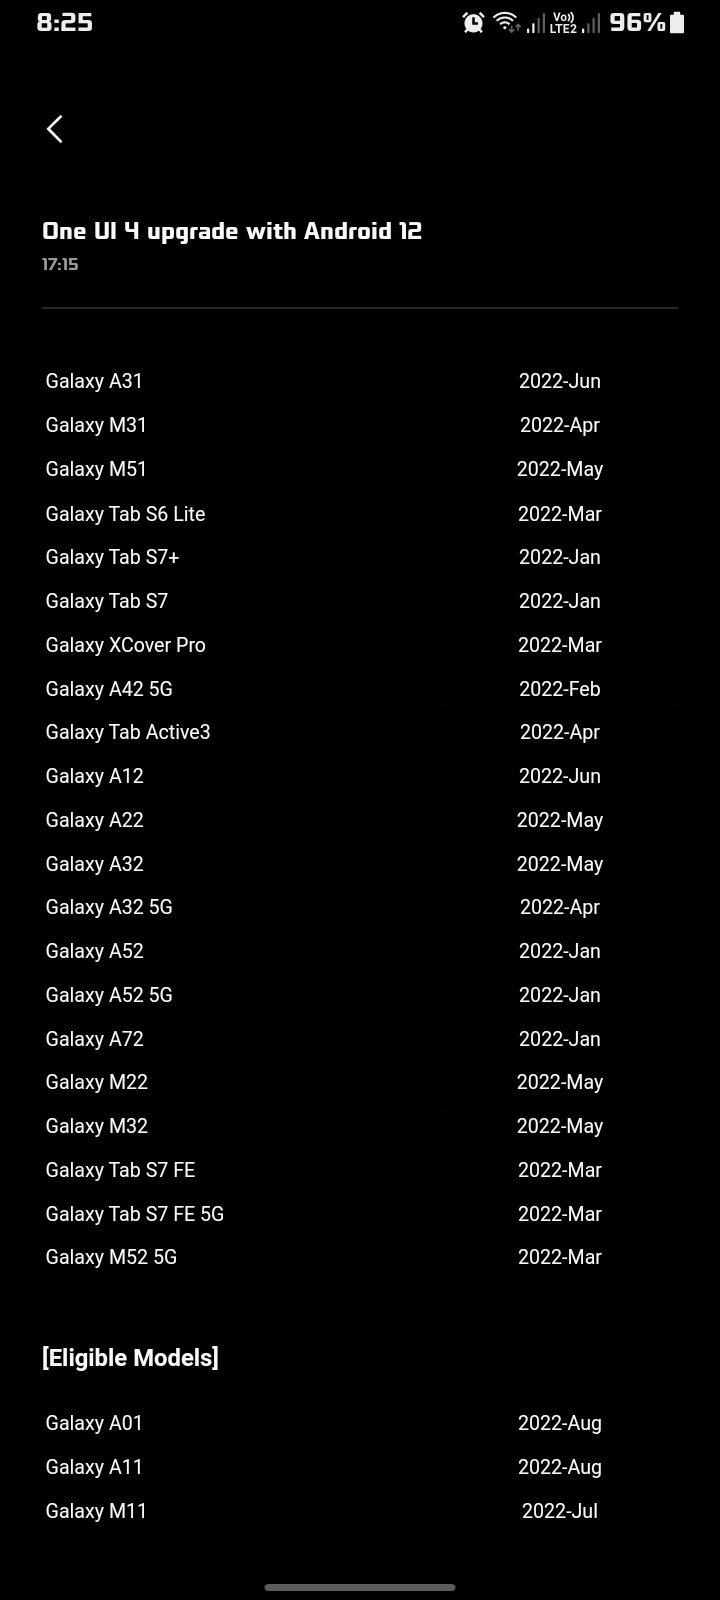 Samsung Galaxy A12 - Android 12 update - Samsung Members